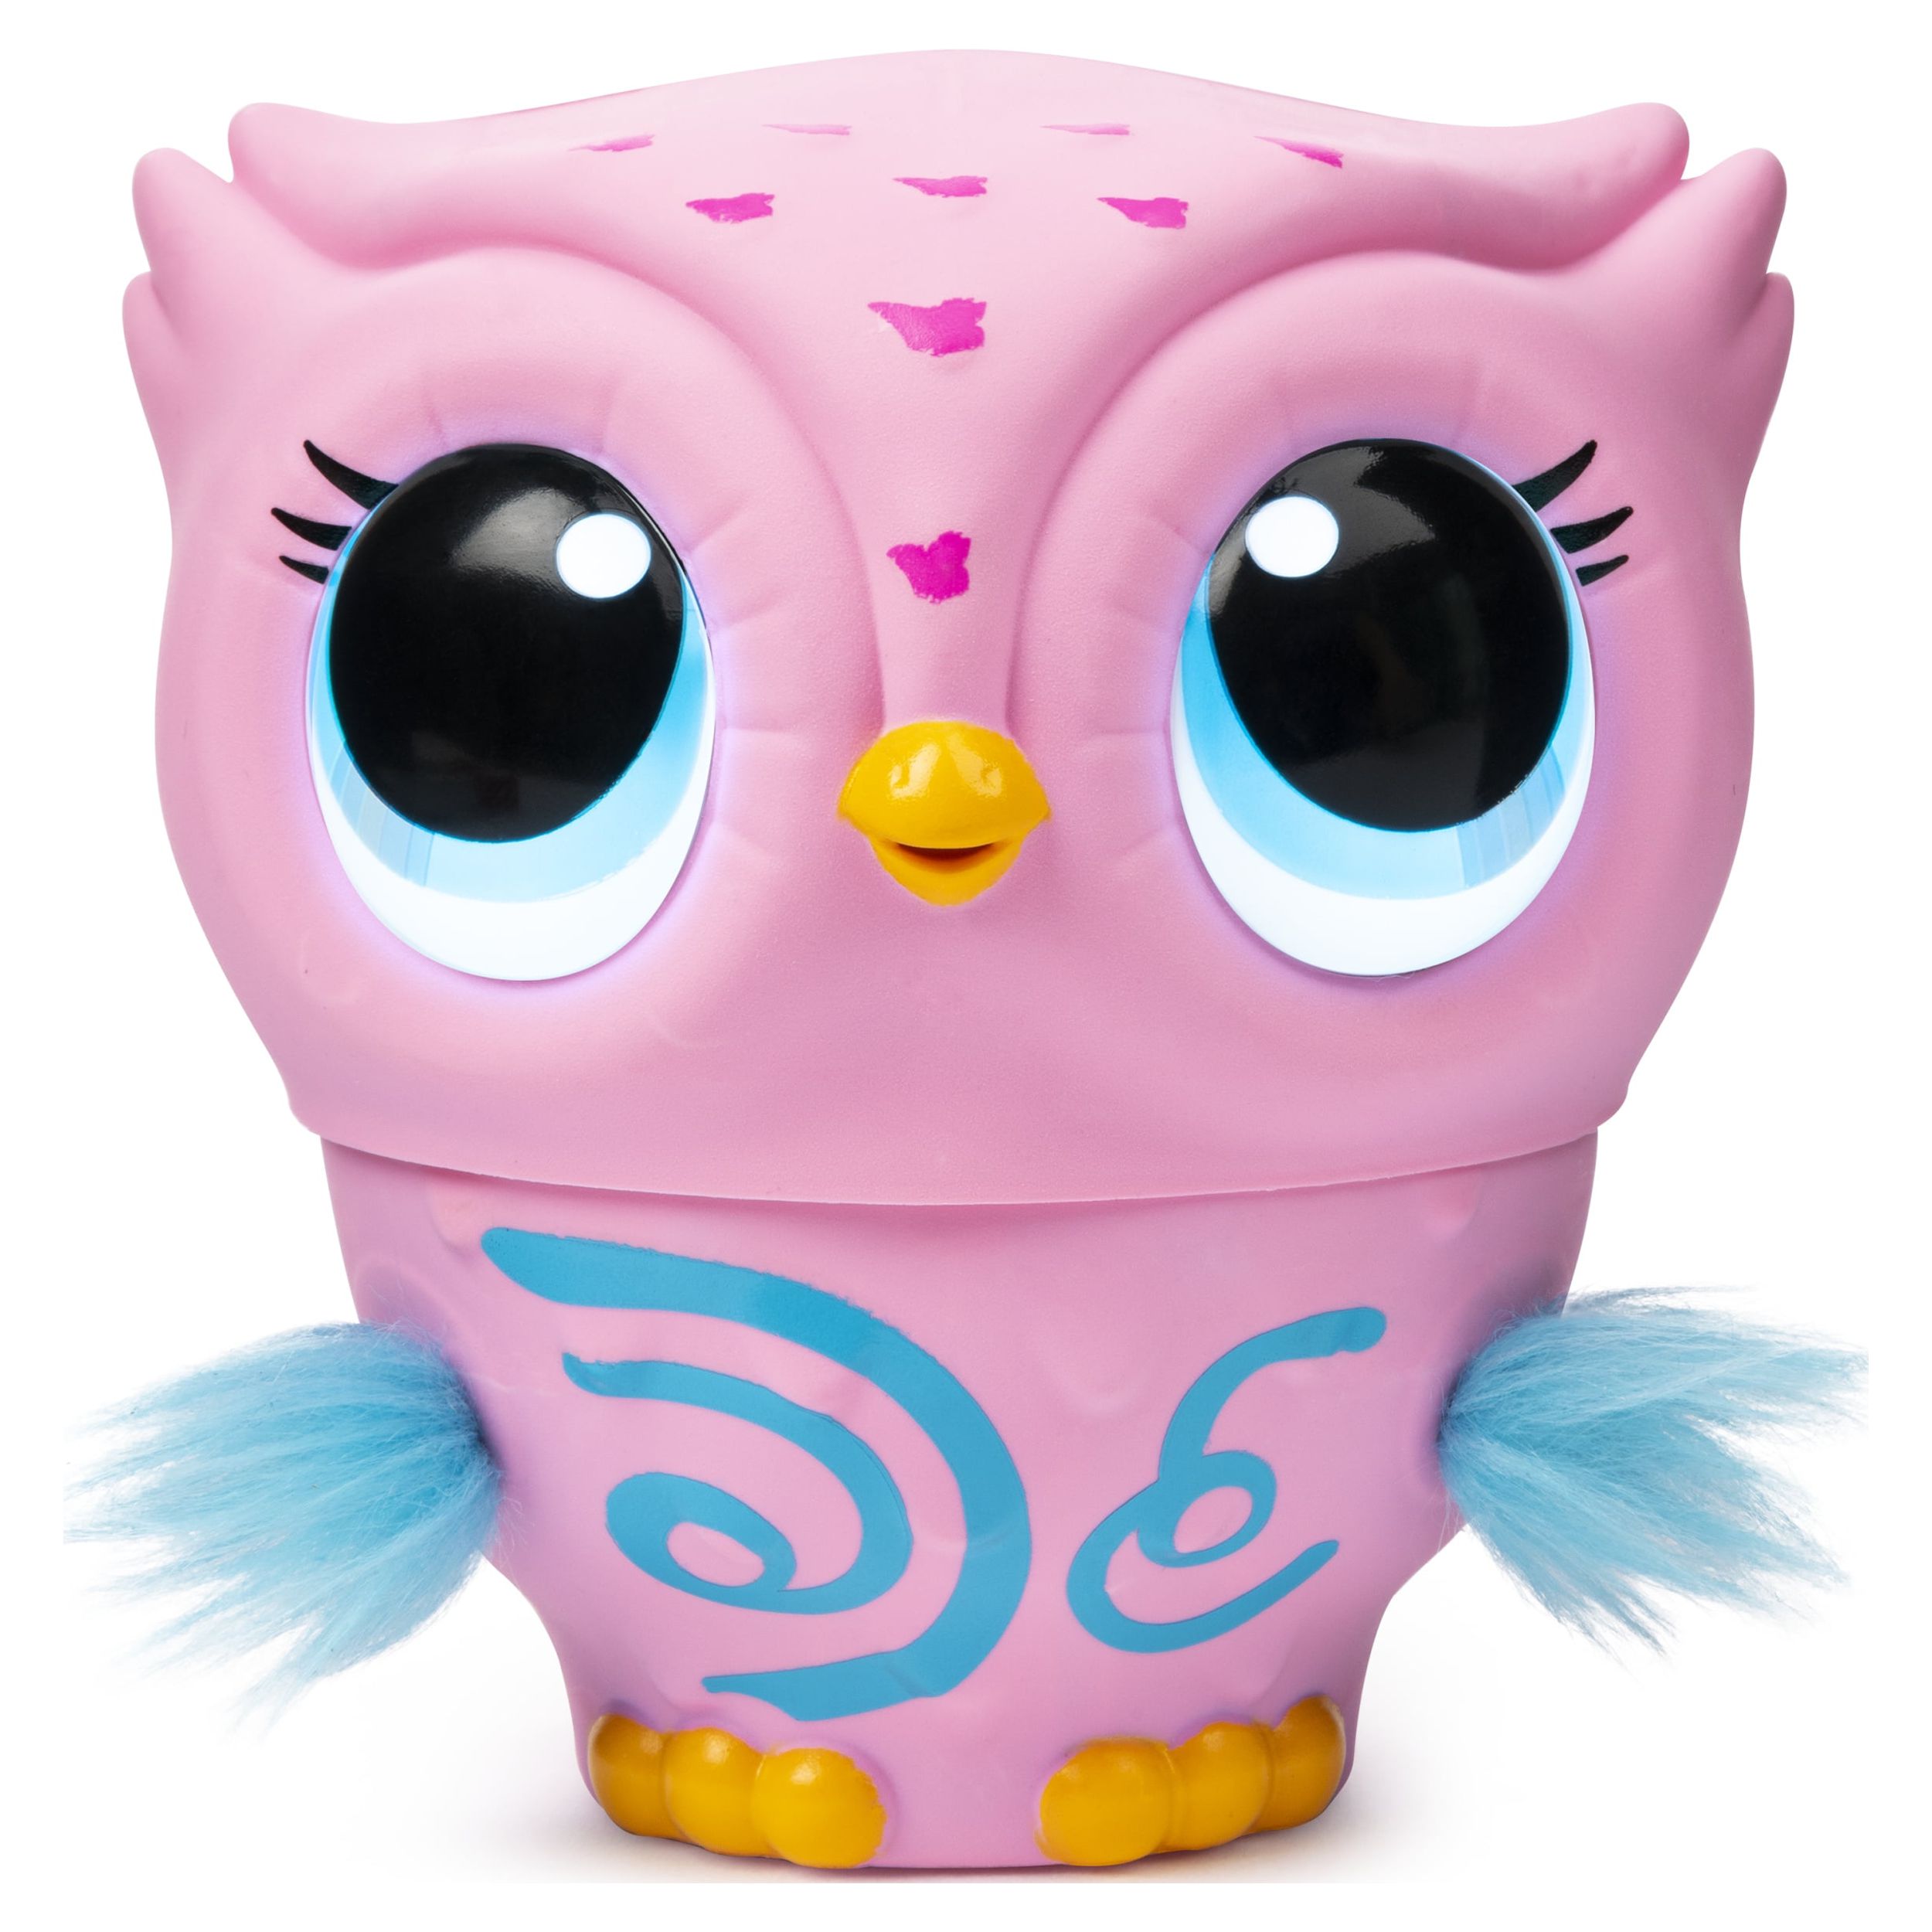 Owleez Flying Baby Owl Interactive Toy with Lights and Sounds (Pink) - image 1 of 8